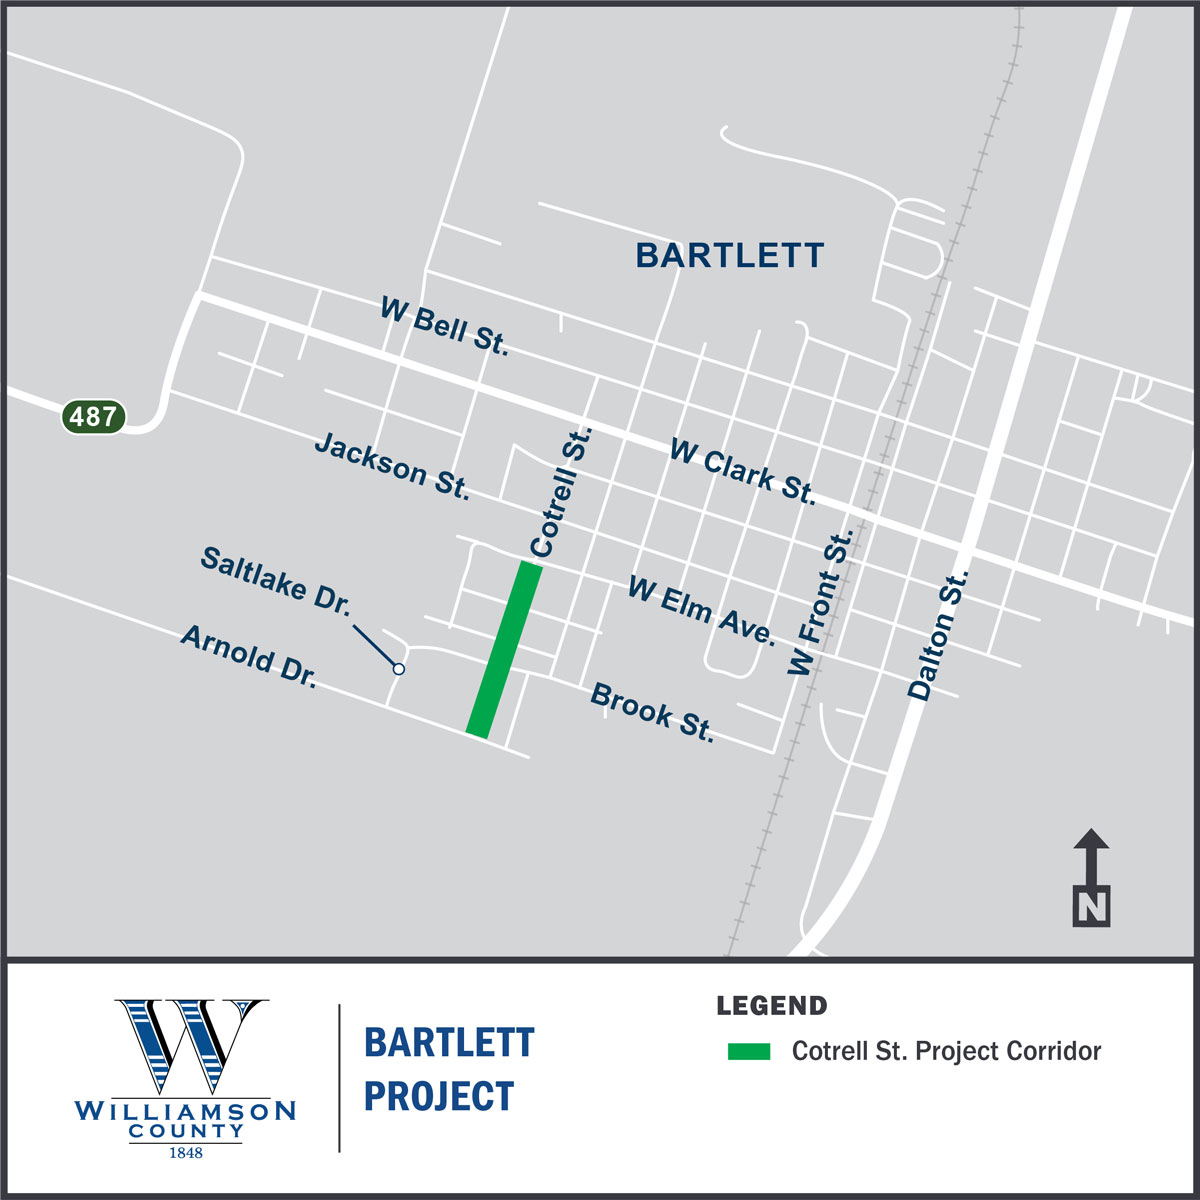 Project Map for the Bartlett Project